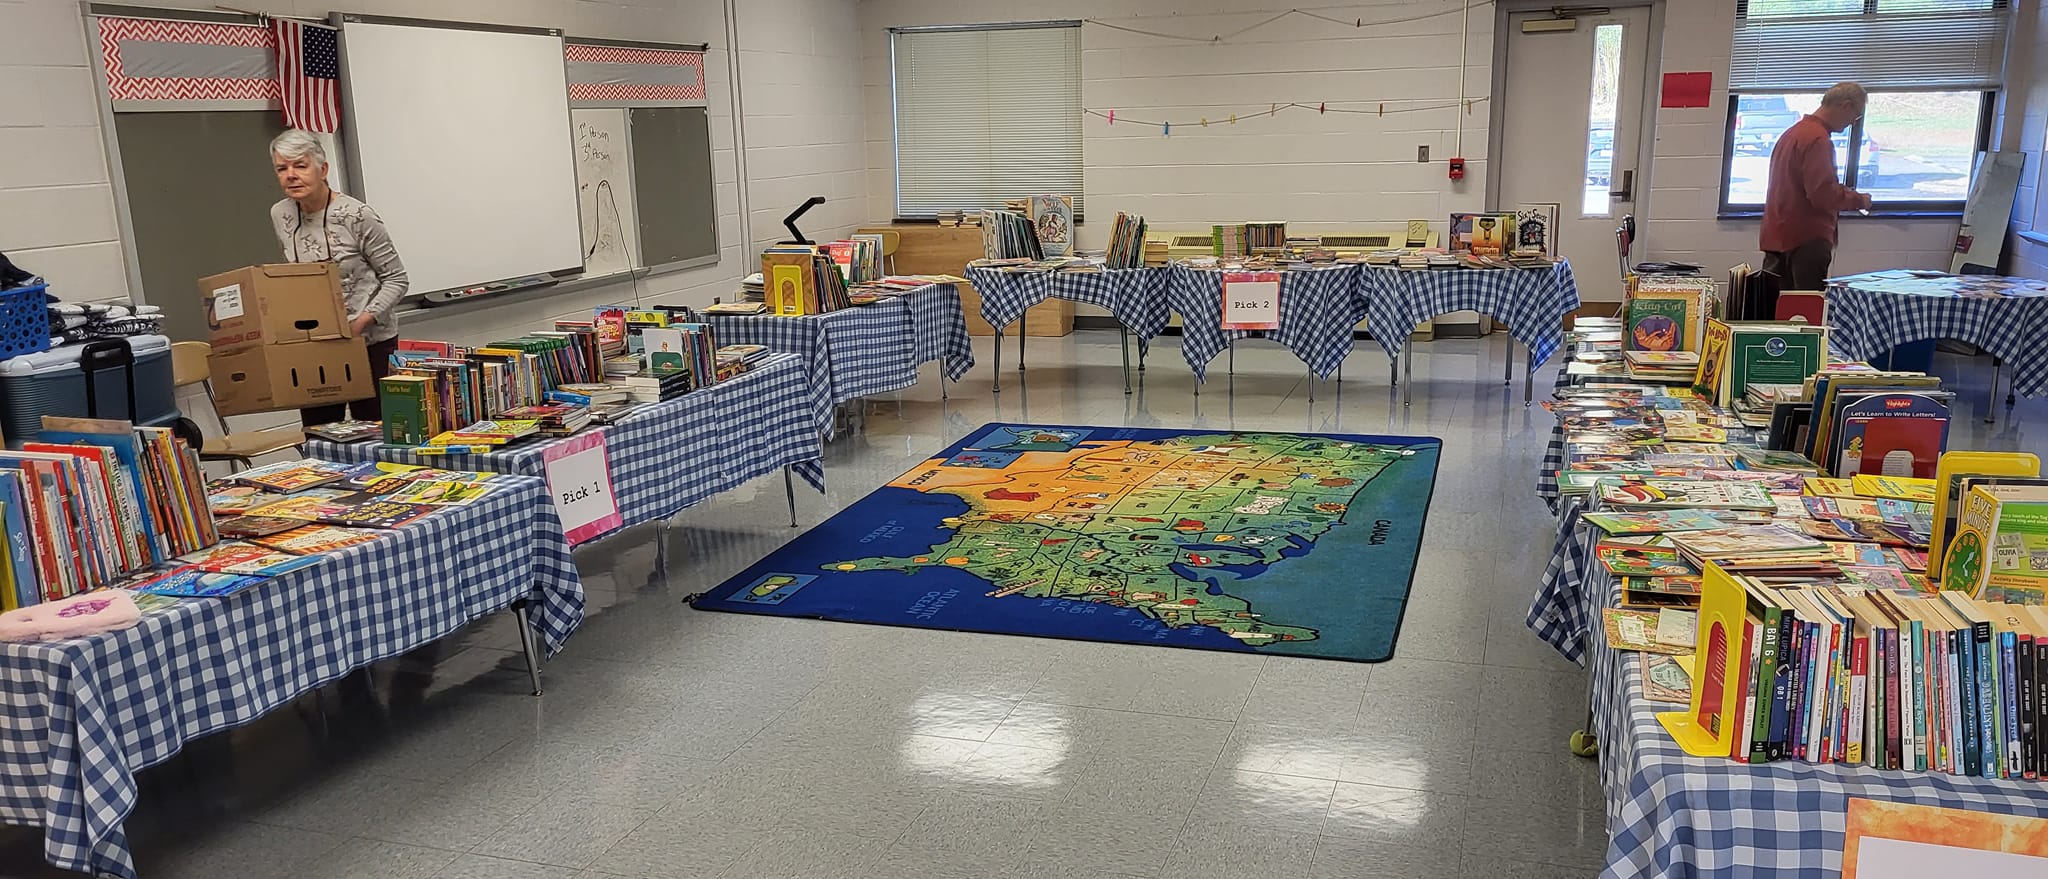 anna's books free book fair set up in a haywood county school